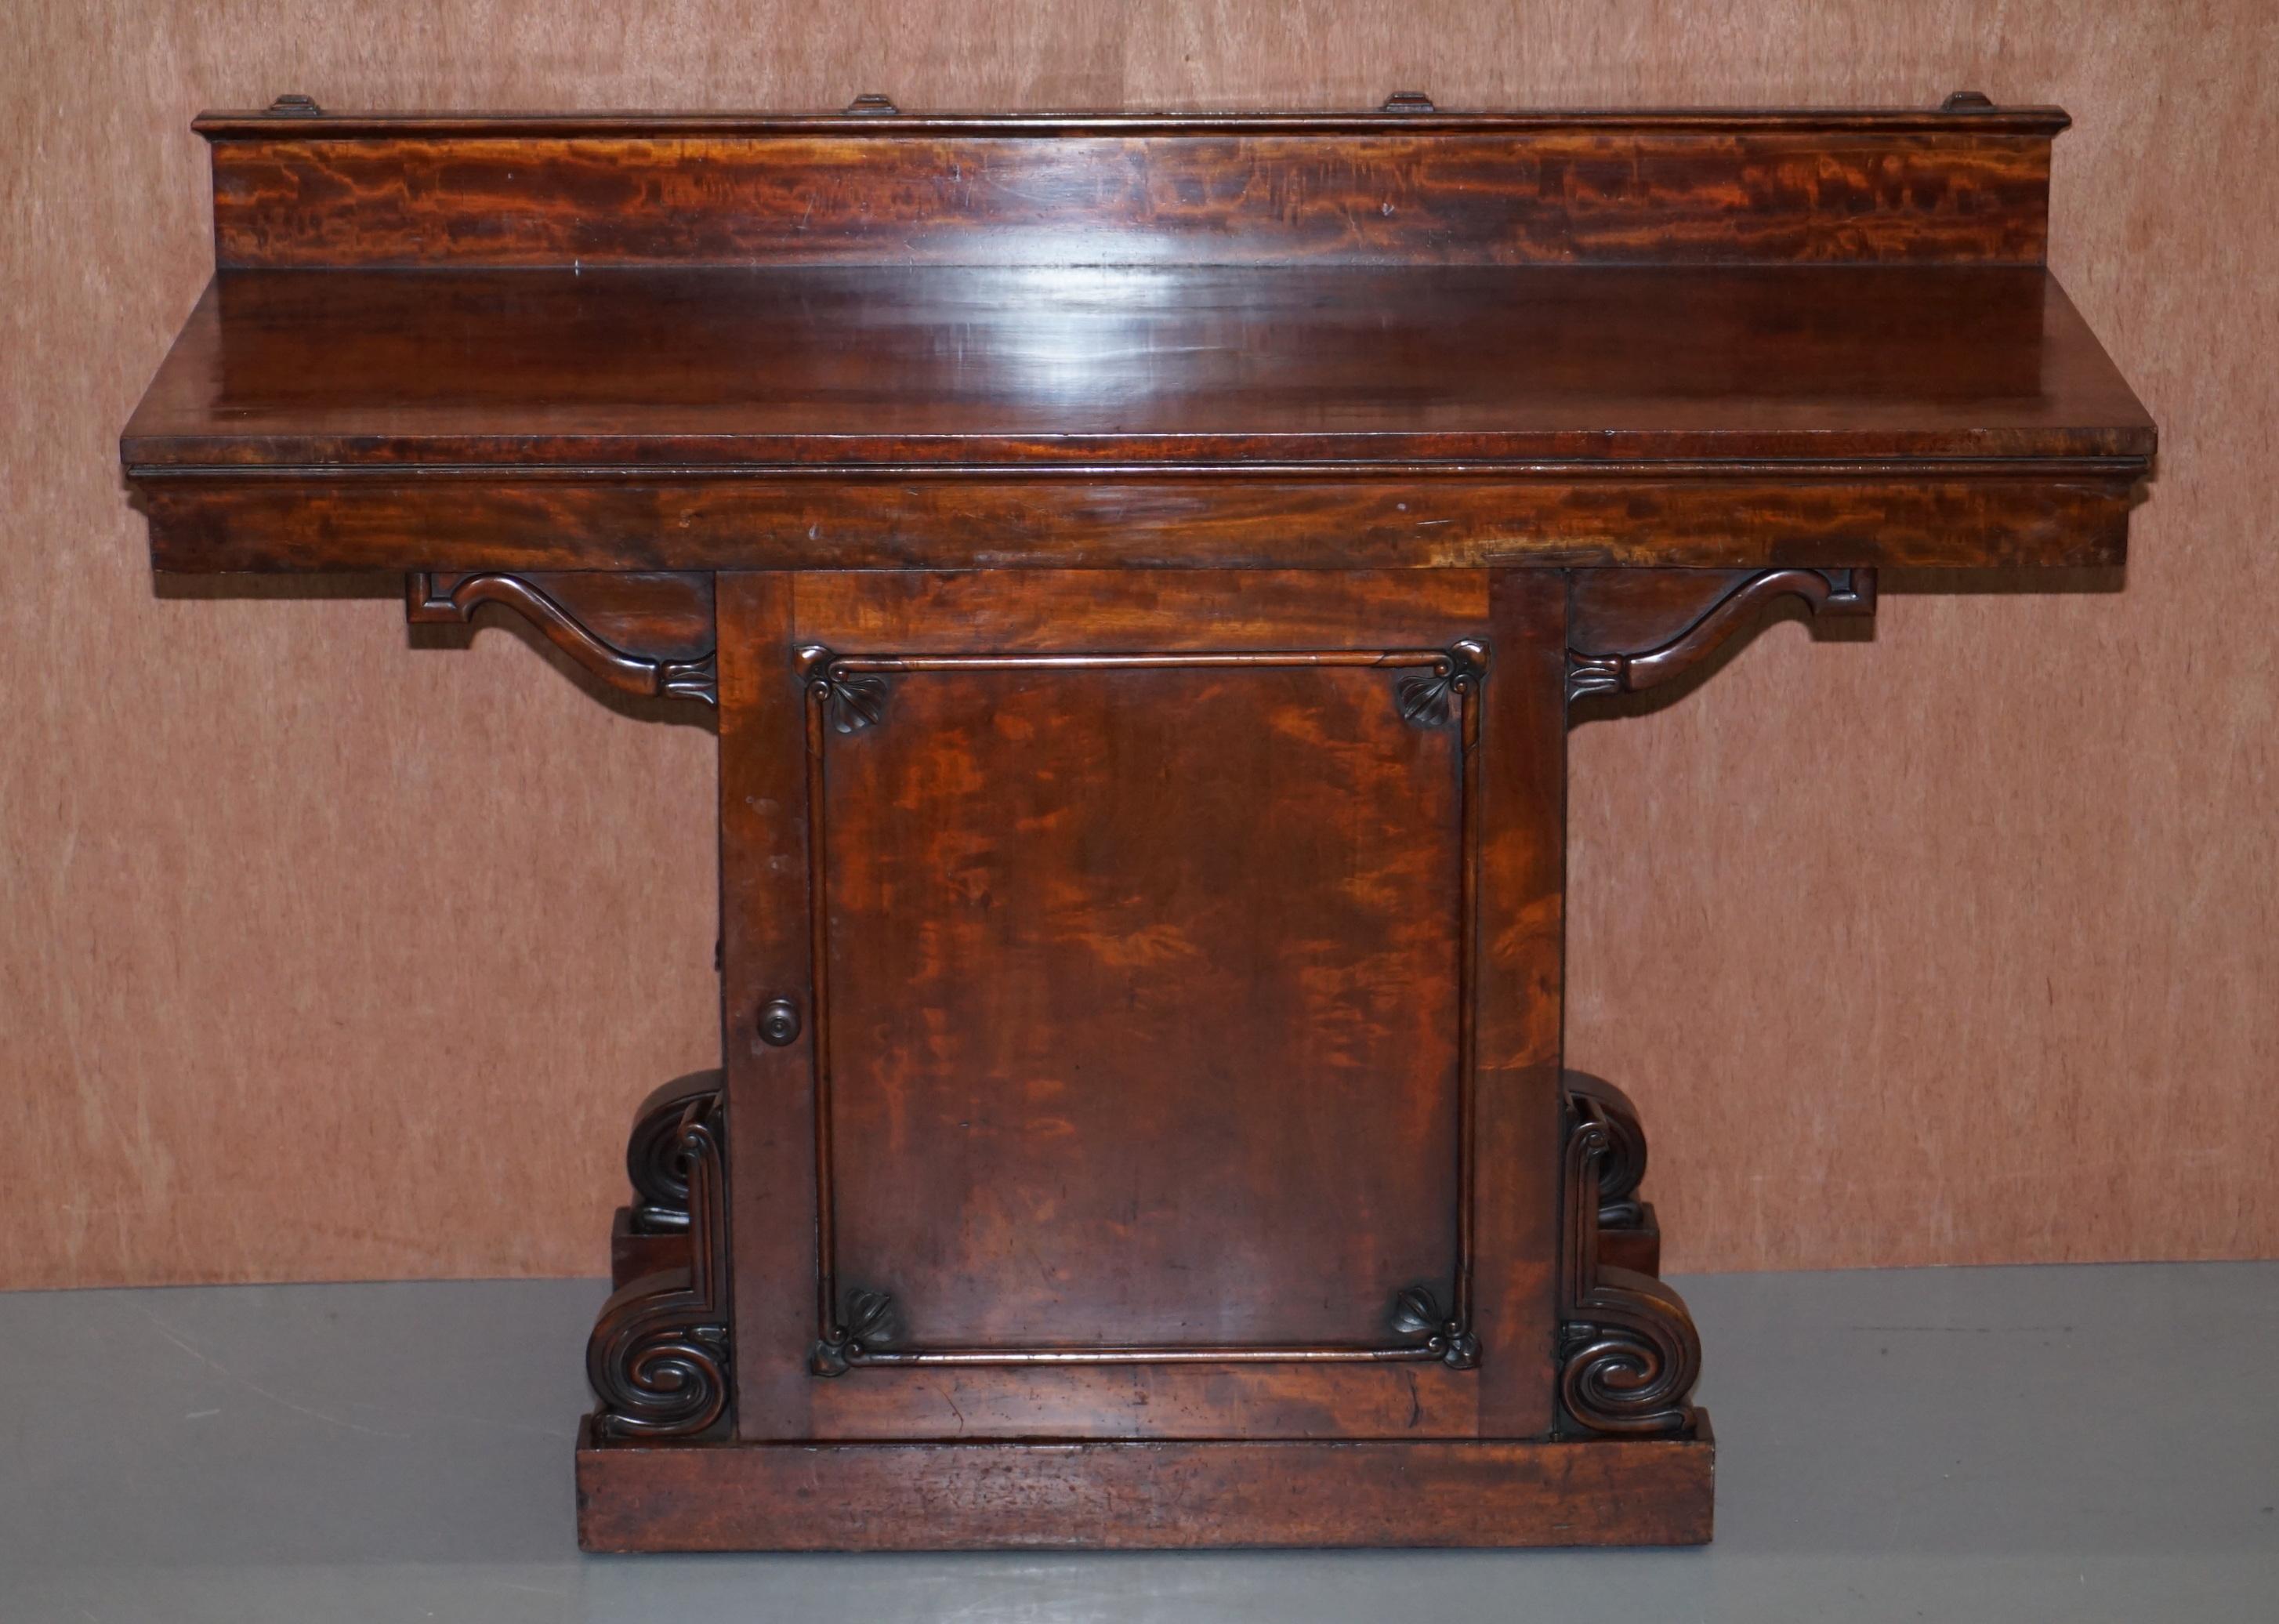 We are delighted to offer for sale this sublime circa 1830 William IV Cuban mahogany wine cellar sideboard

A very fine and significant piece of furniture, the timber is all period Cuban mahogany with ornate carvings all over. The top drawer is